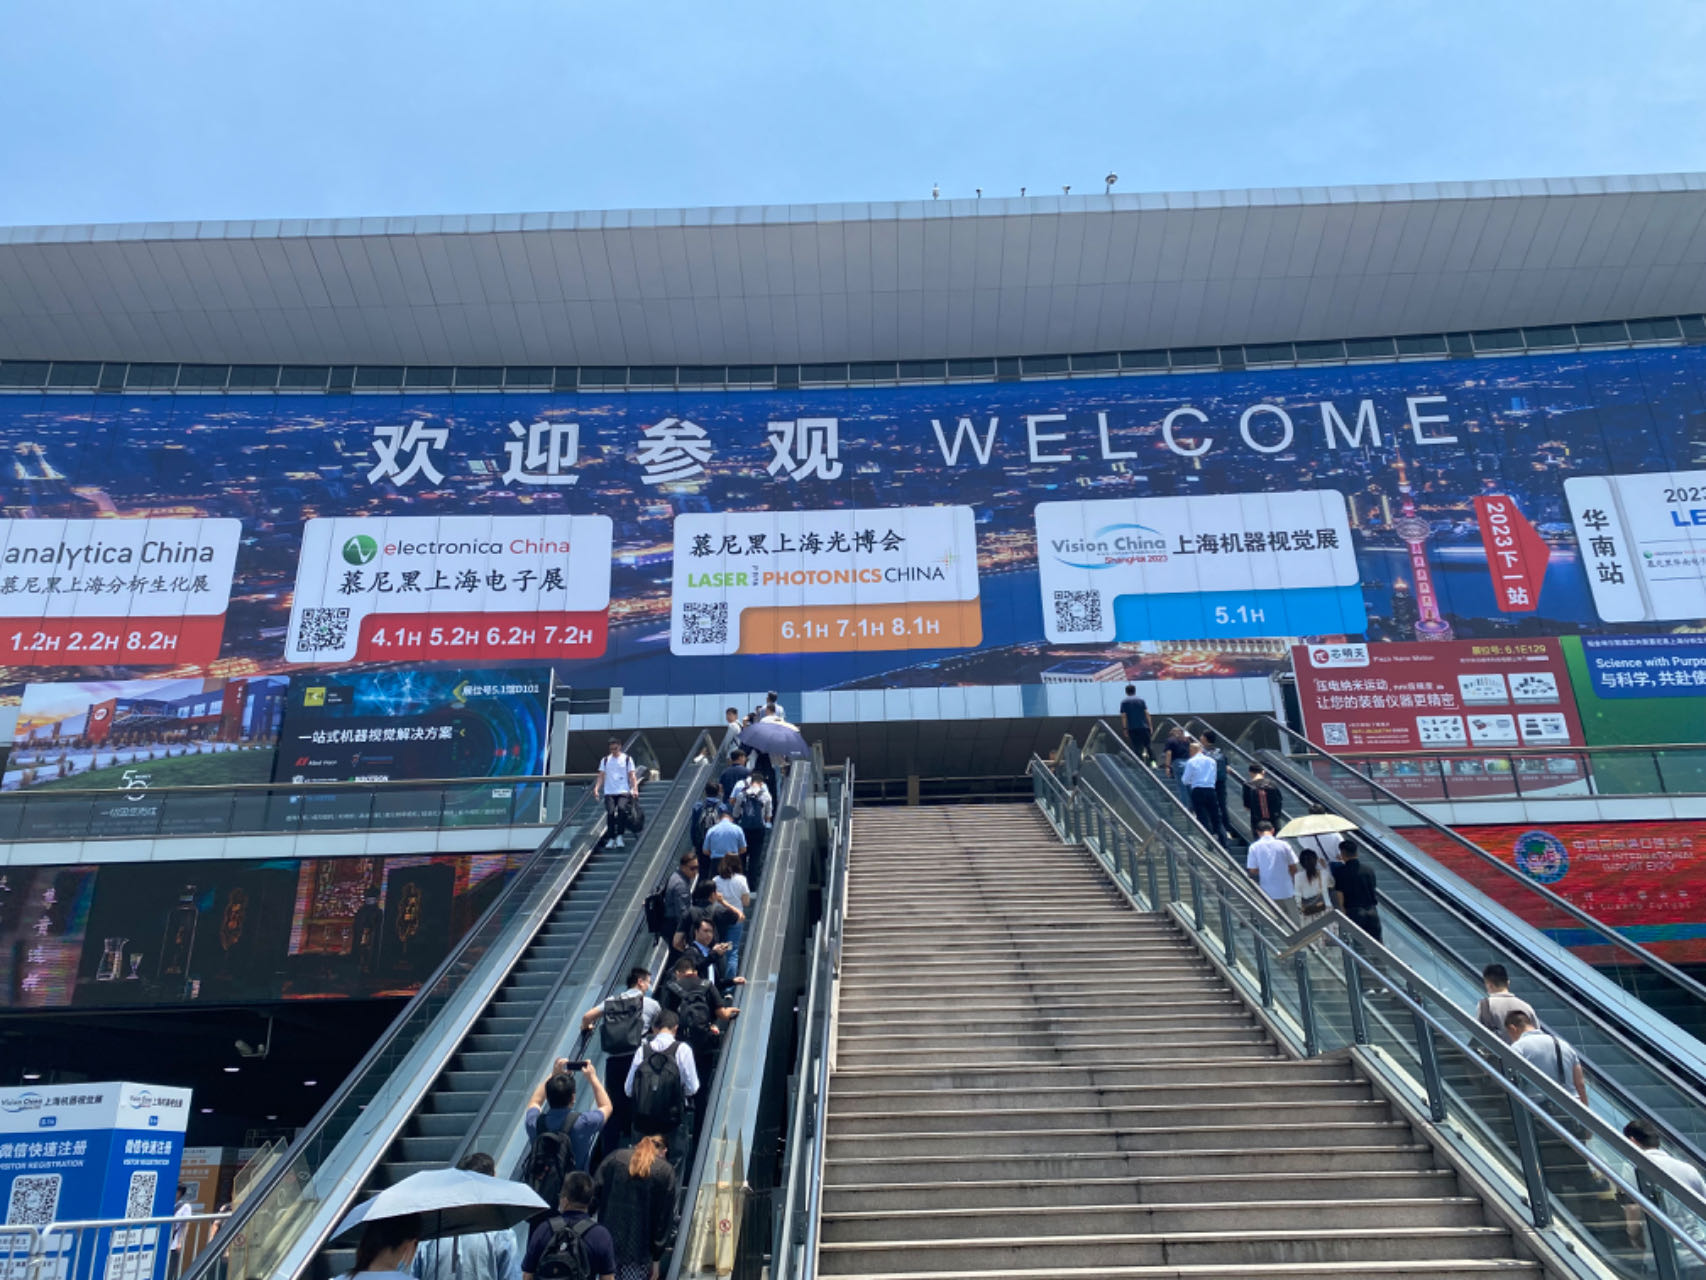 Review of the Shanghai Electronic China Exhibition